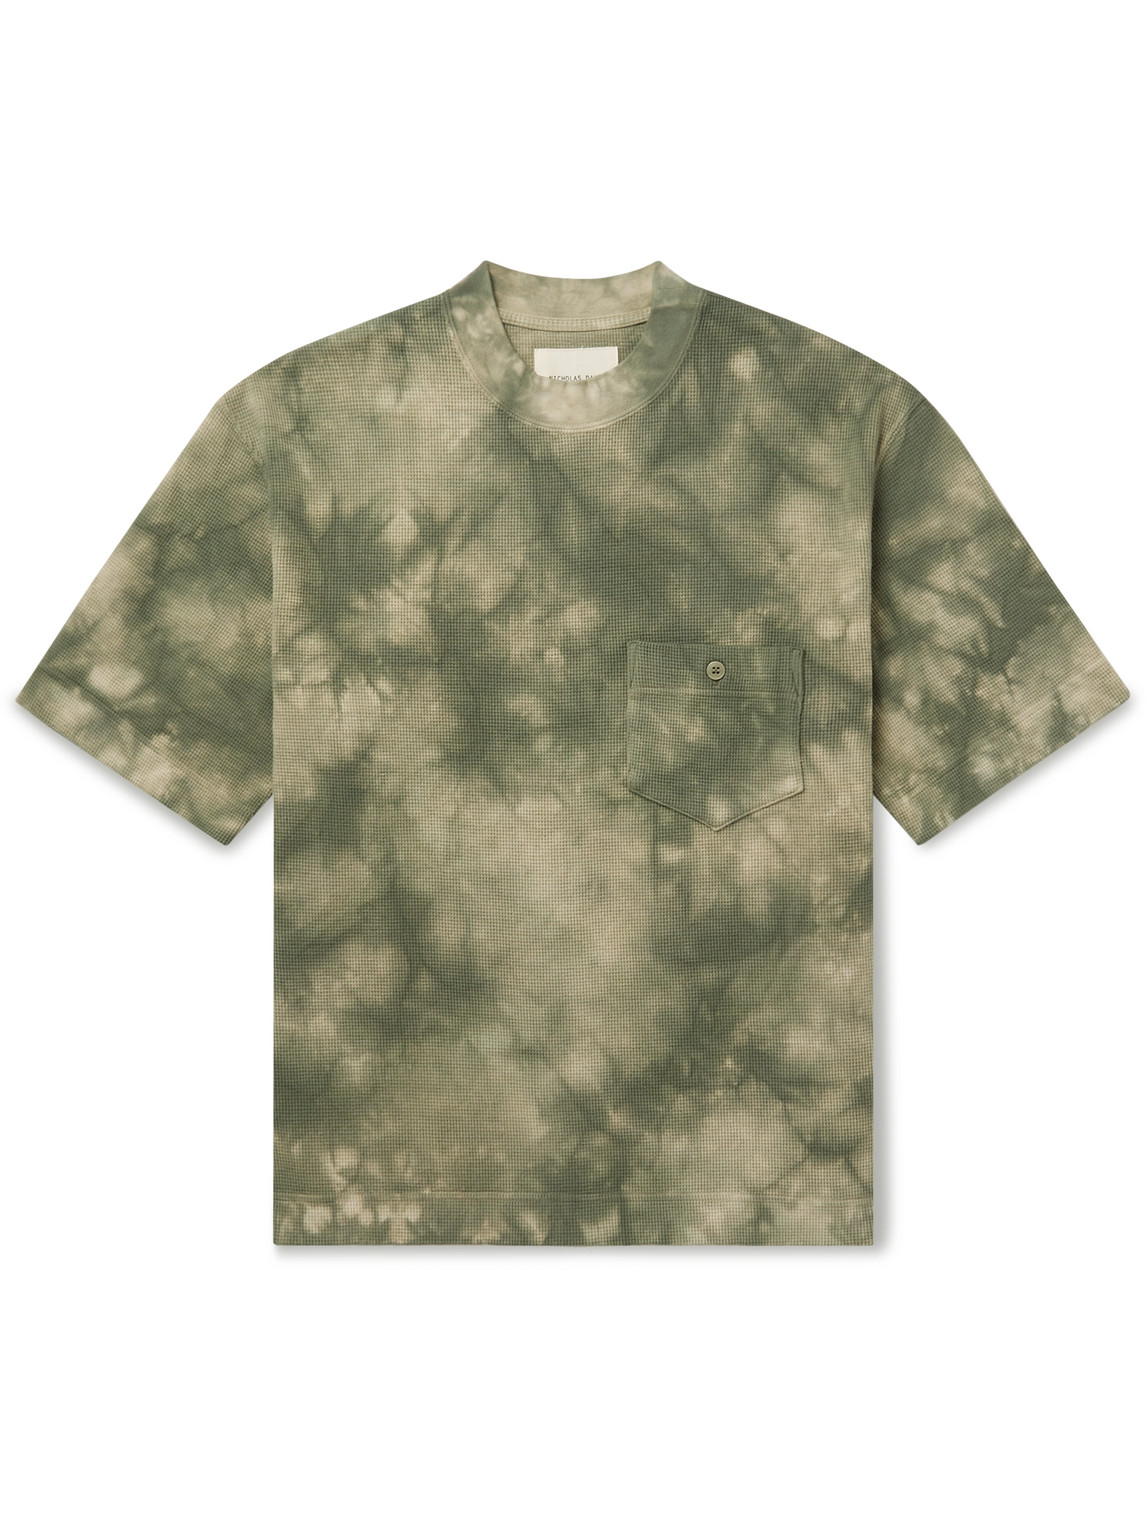 Tie-Dyed Waffle-Knit Cotton-Blend Jersey T-Shirt